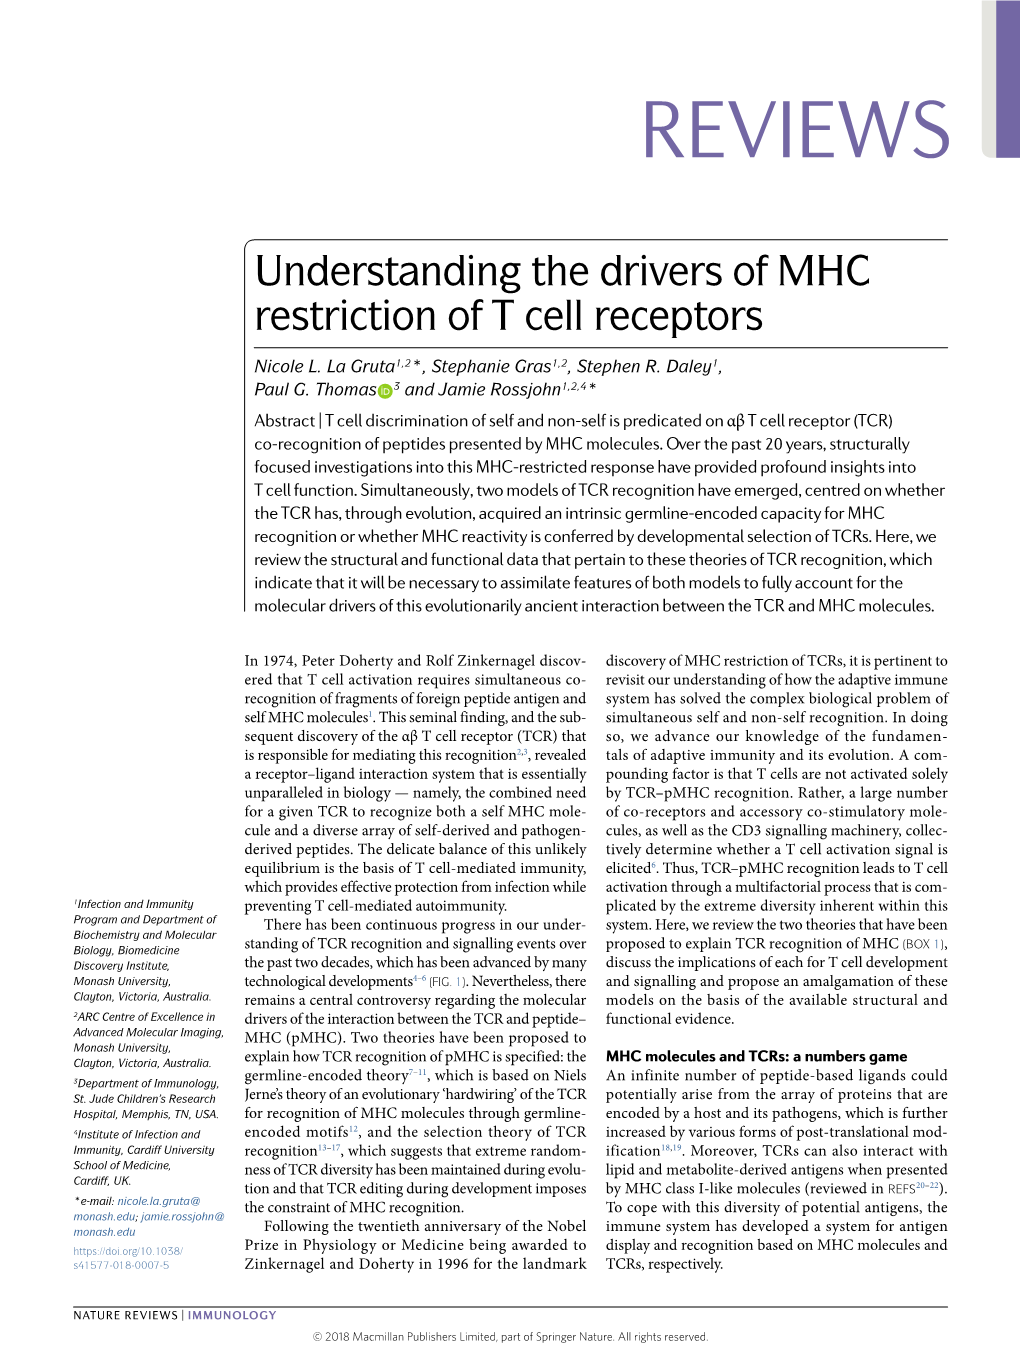 Understanding the Drivers of MHC Restriction of T Cell Receptors